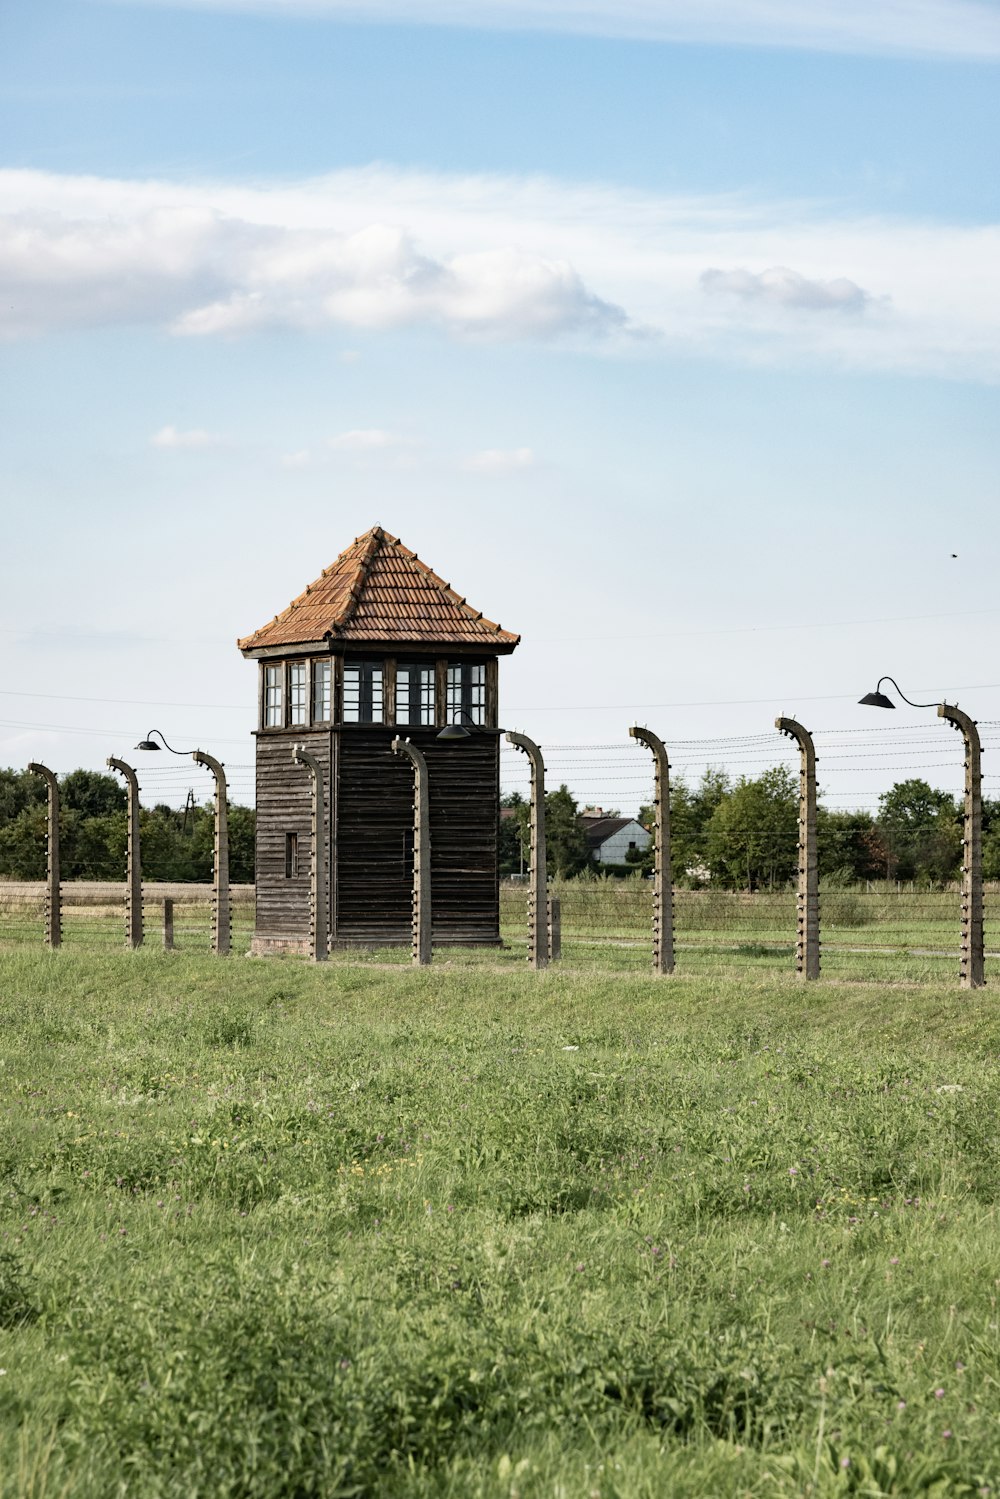 a small wooden structure in a grassy field